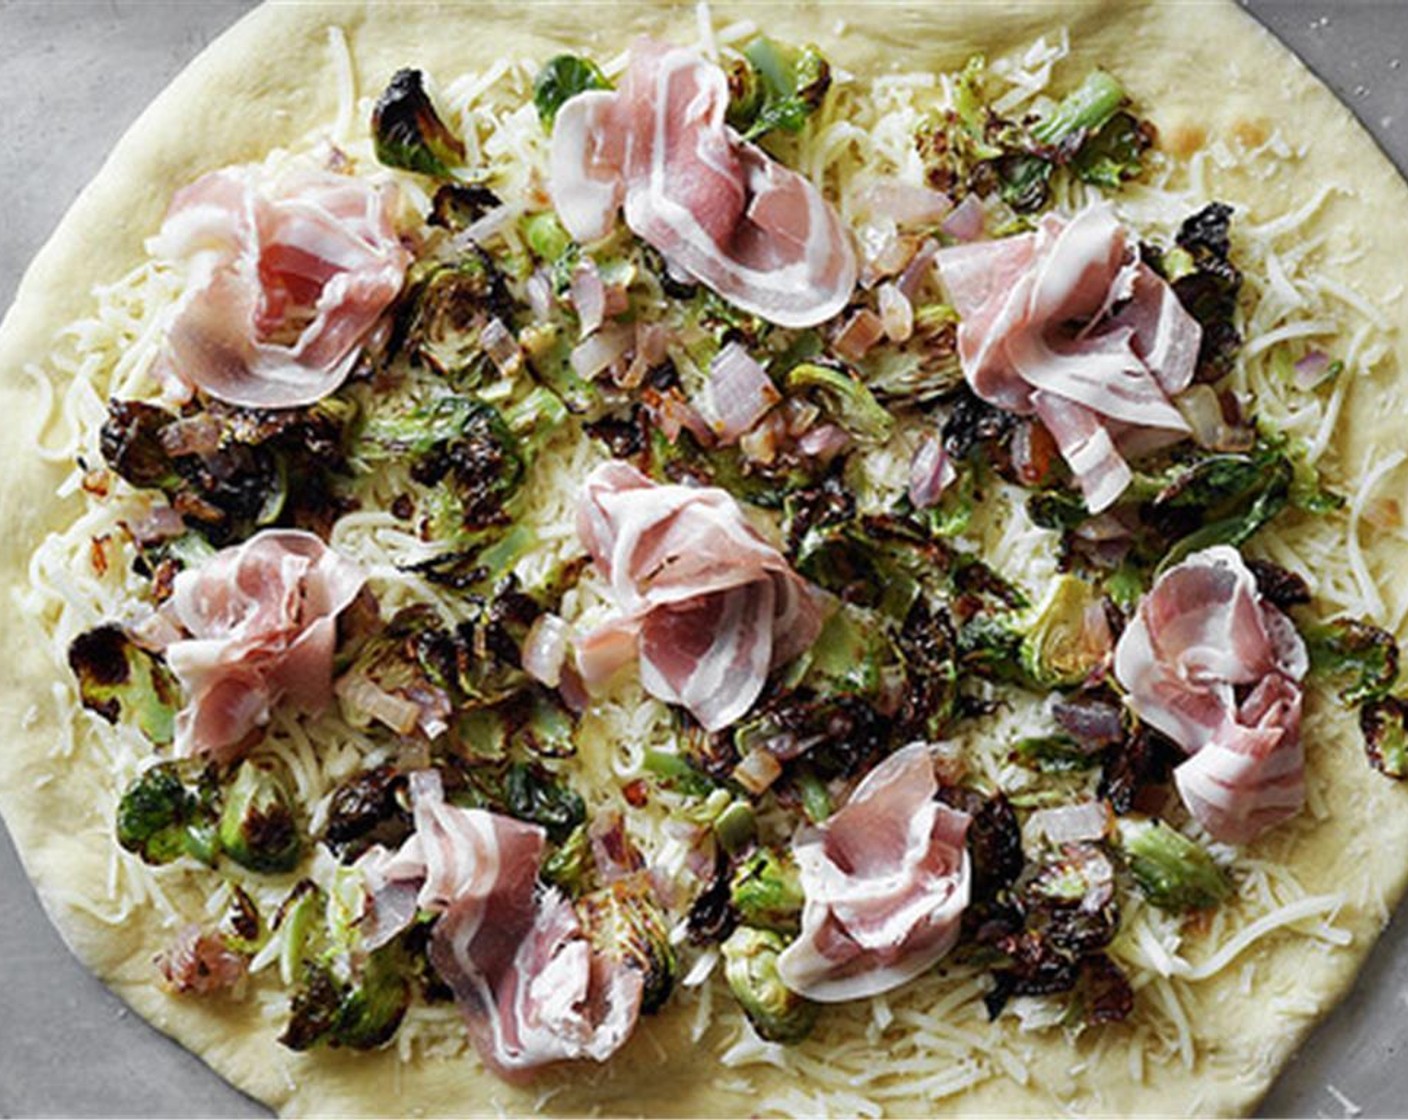 step 13 Top with the crispy brussels sprout leaves and sautéed red onion. Lay a couple slices of pancetta on each pizza. Bake for about 5 minutes to melt the cheese and continue to brown the crust.